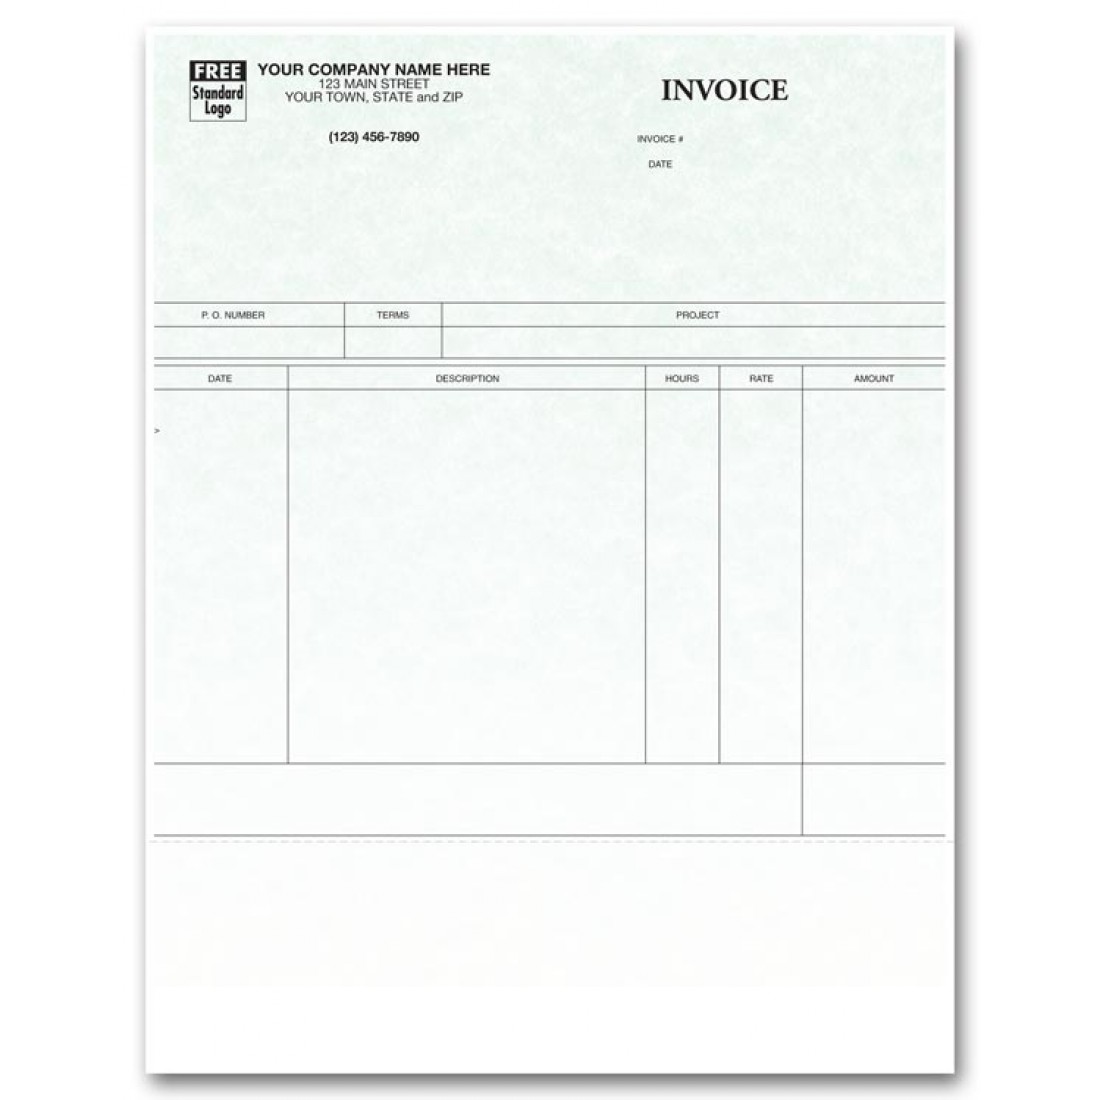 my deluxe invoices free download